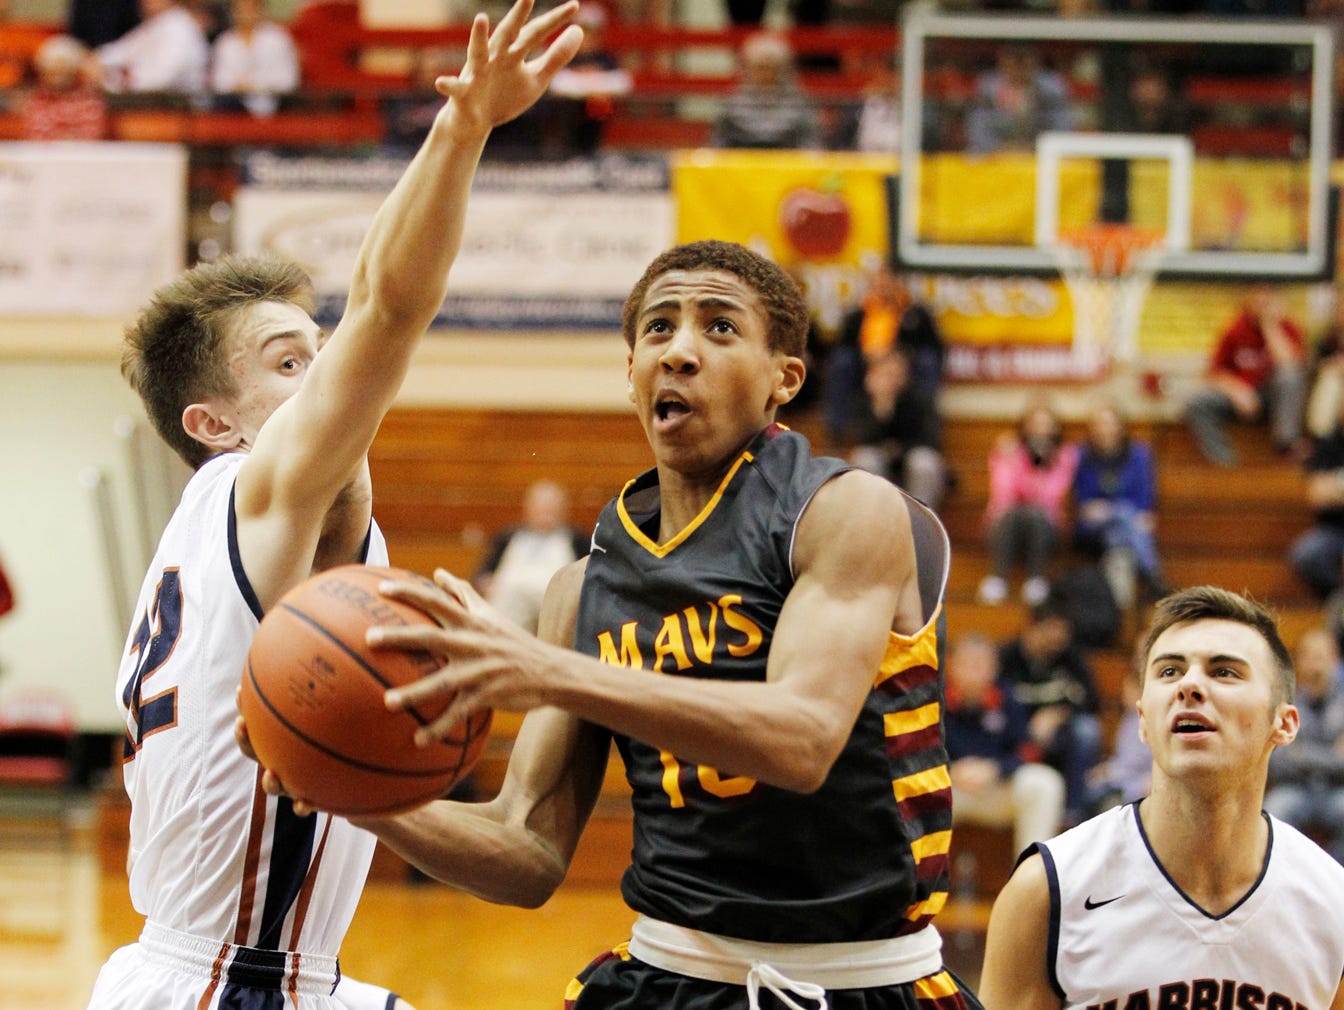 Robert Phinisee of McCutcheon drives to the basket against Harrison in the semifinals of the J&C Hoops Classic Friday, December 4, 2015, at Lafayette Jeff. McCutcheon beat county rival Harrison 82-64 and will now face Lafayette Jeff in the J&C Hoops Classic final.